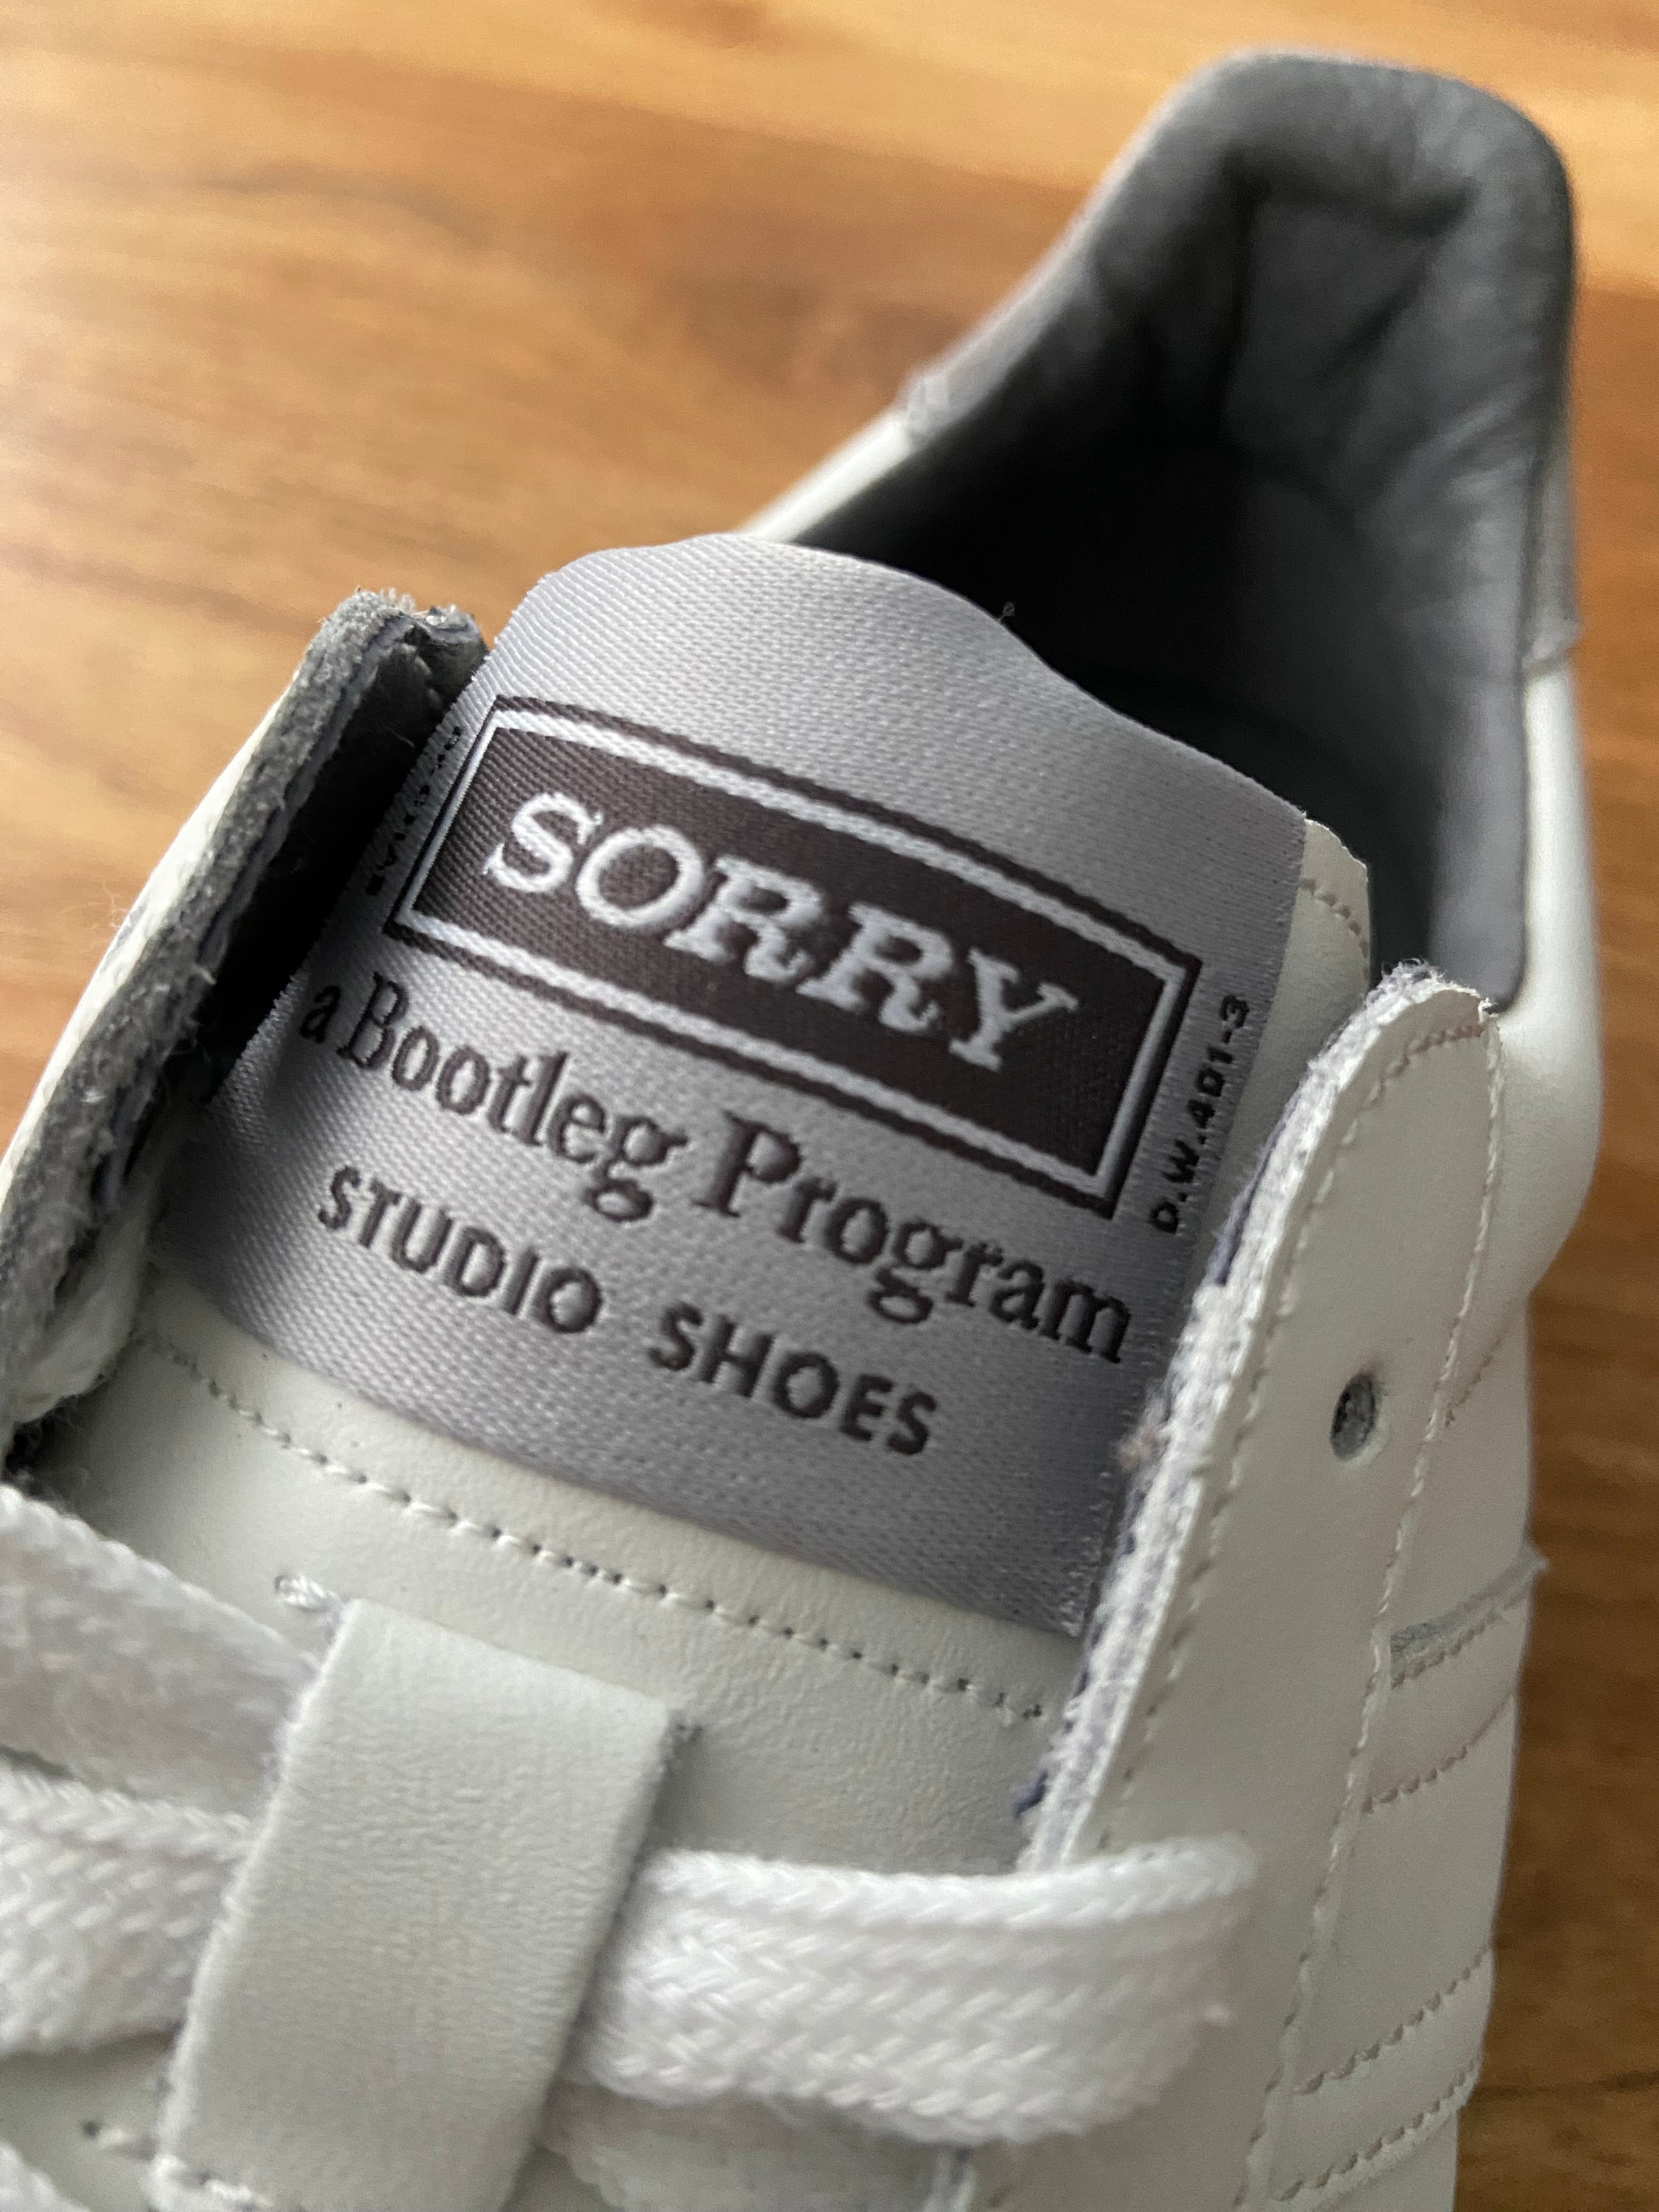 SORRY A BOOTLEG PROGRAM / STUDIO SHOES | DEXIM powered by BASE